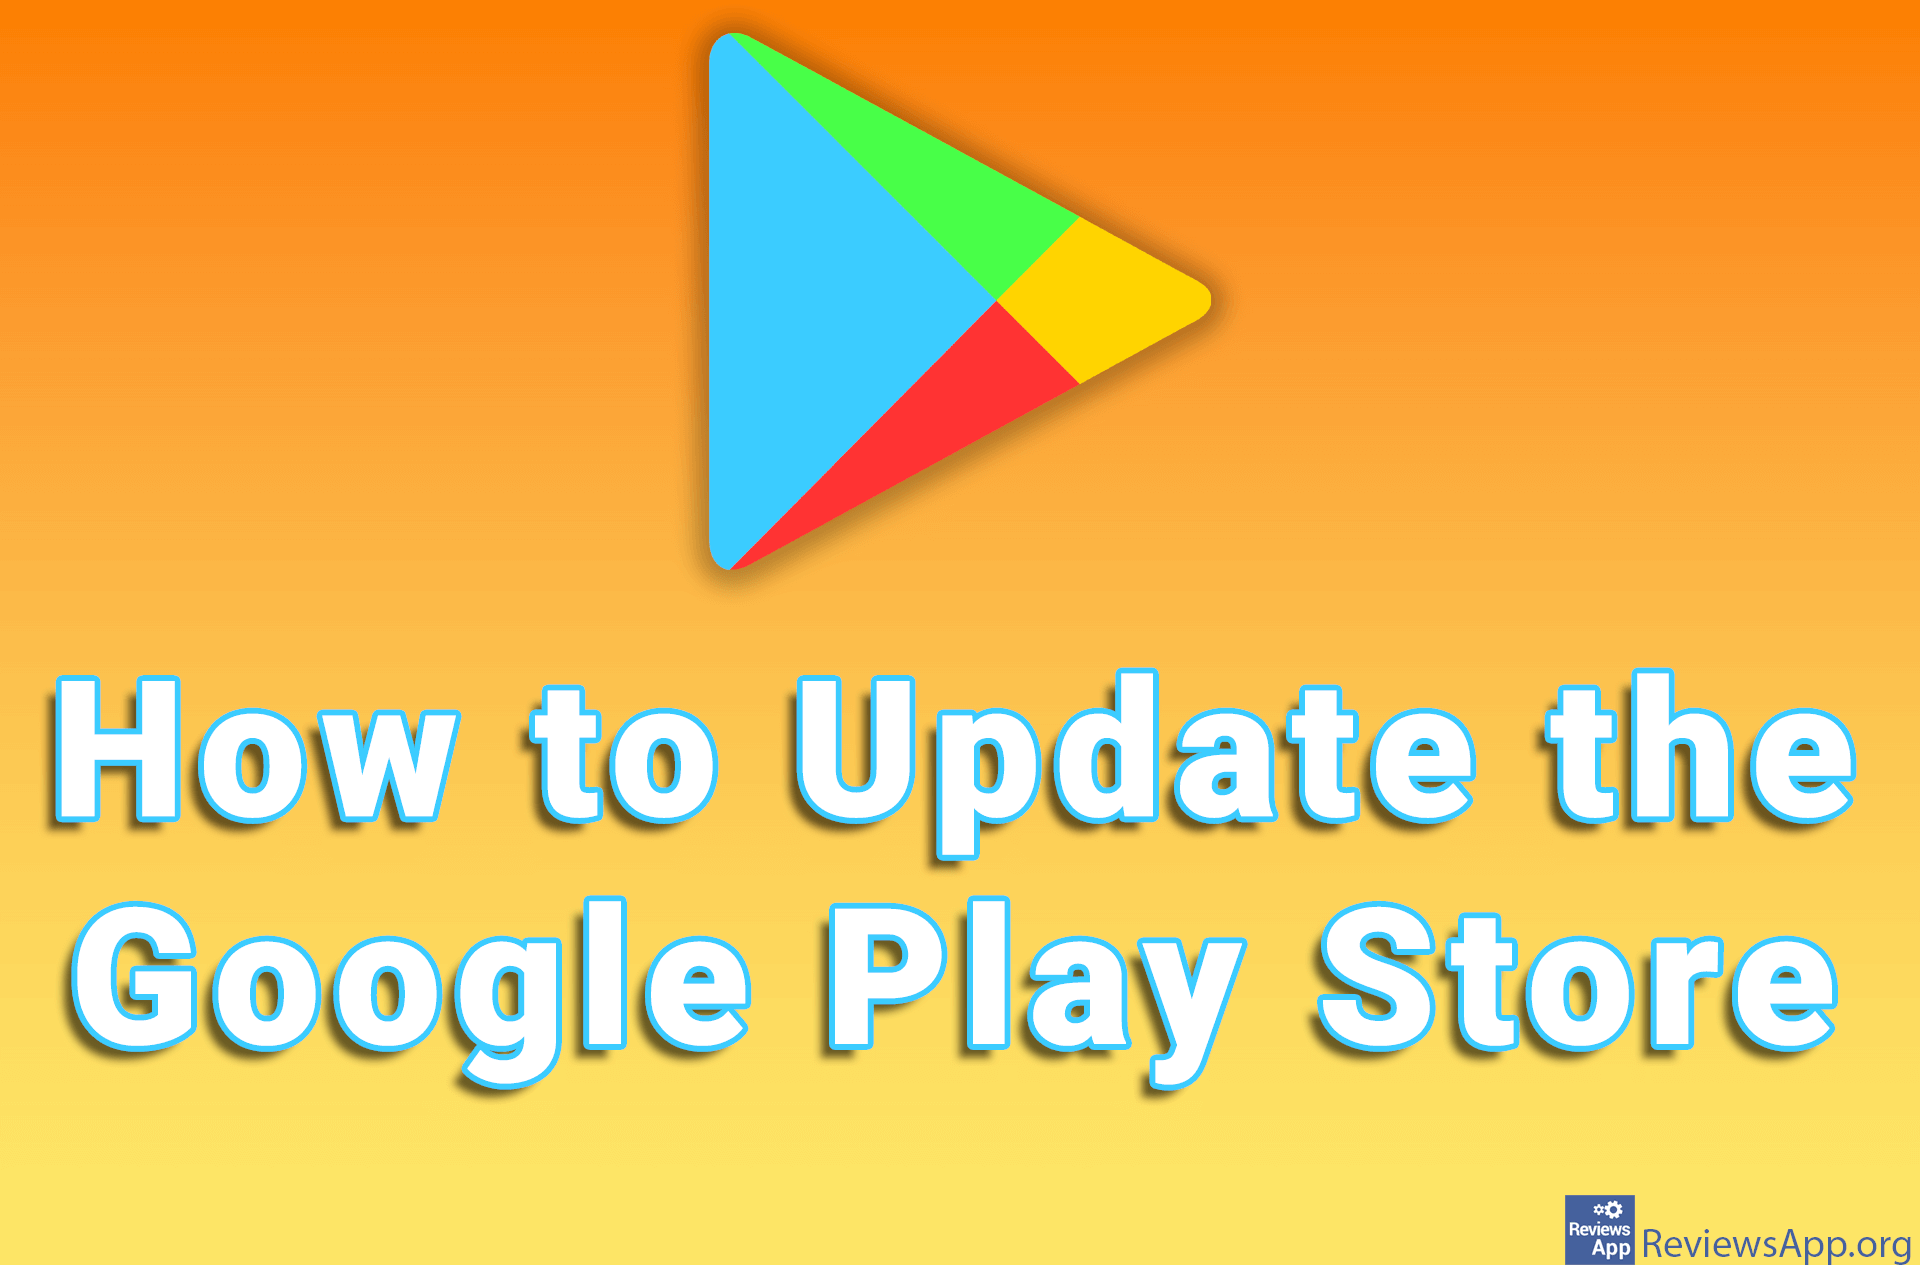 How to Update the Google Play Store